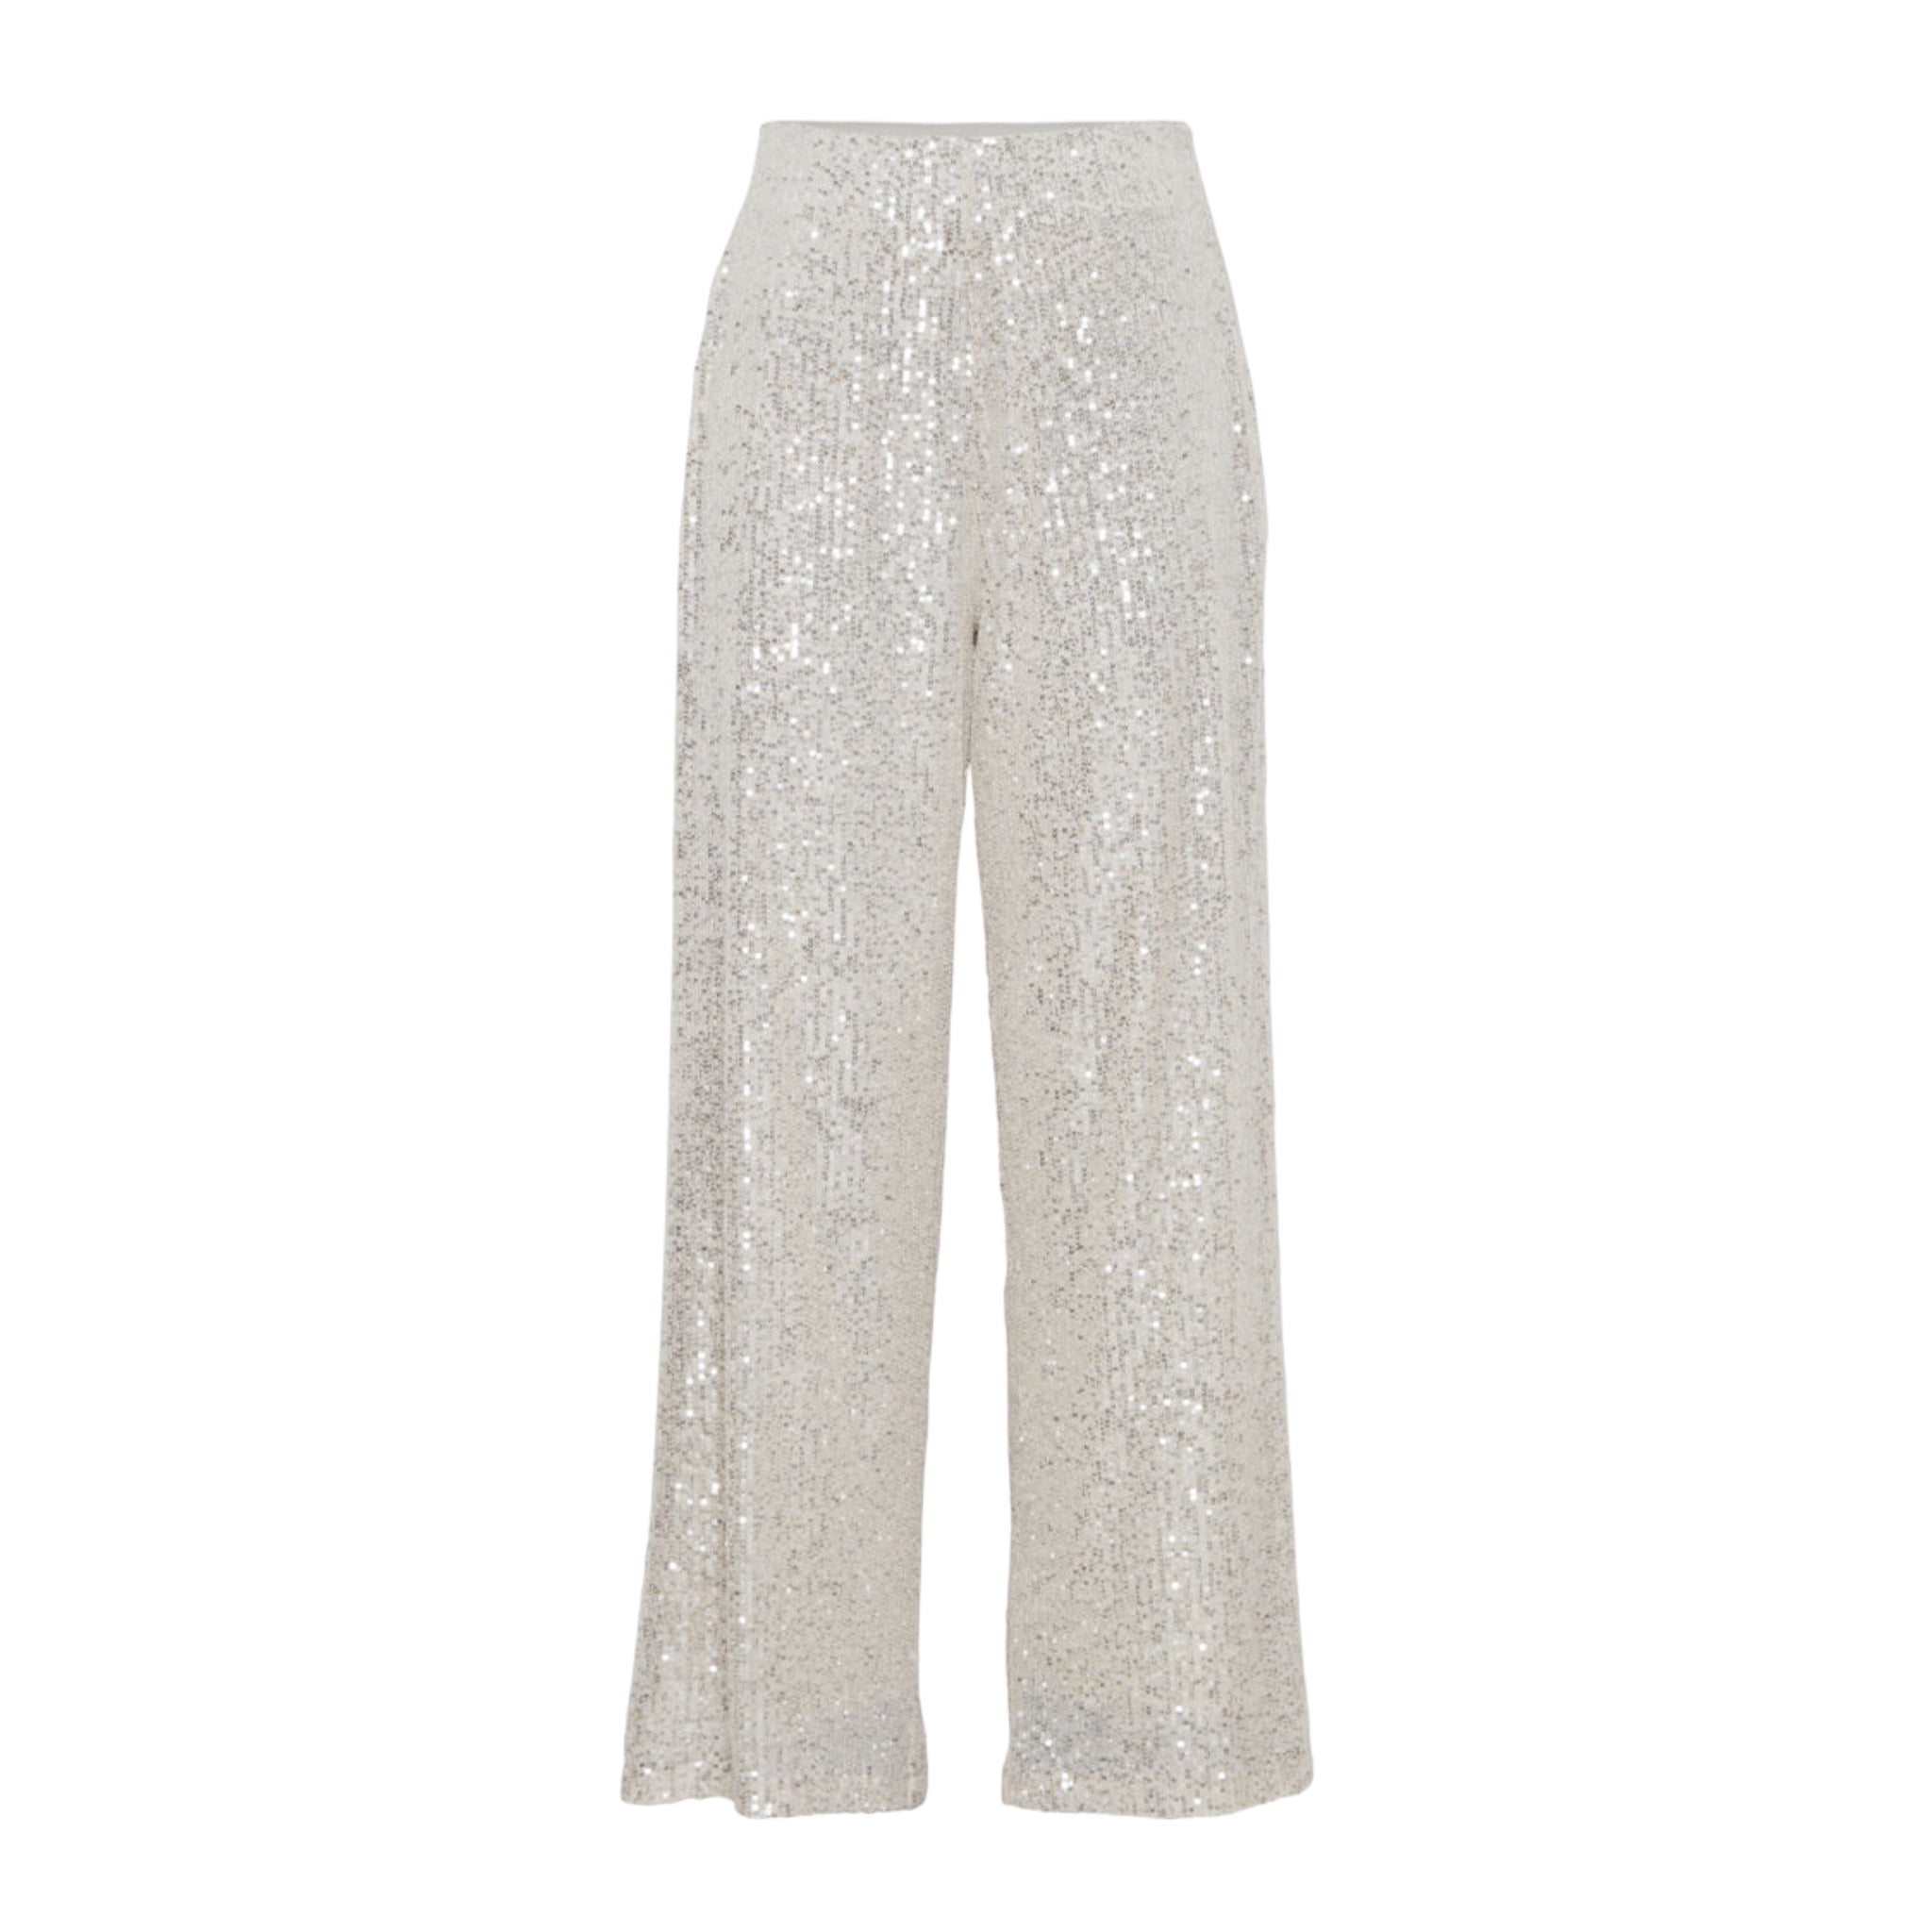 ICHI-Fauci-Trousers-Frosted-Almond-Product-Image-Front-View